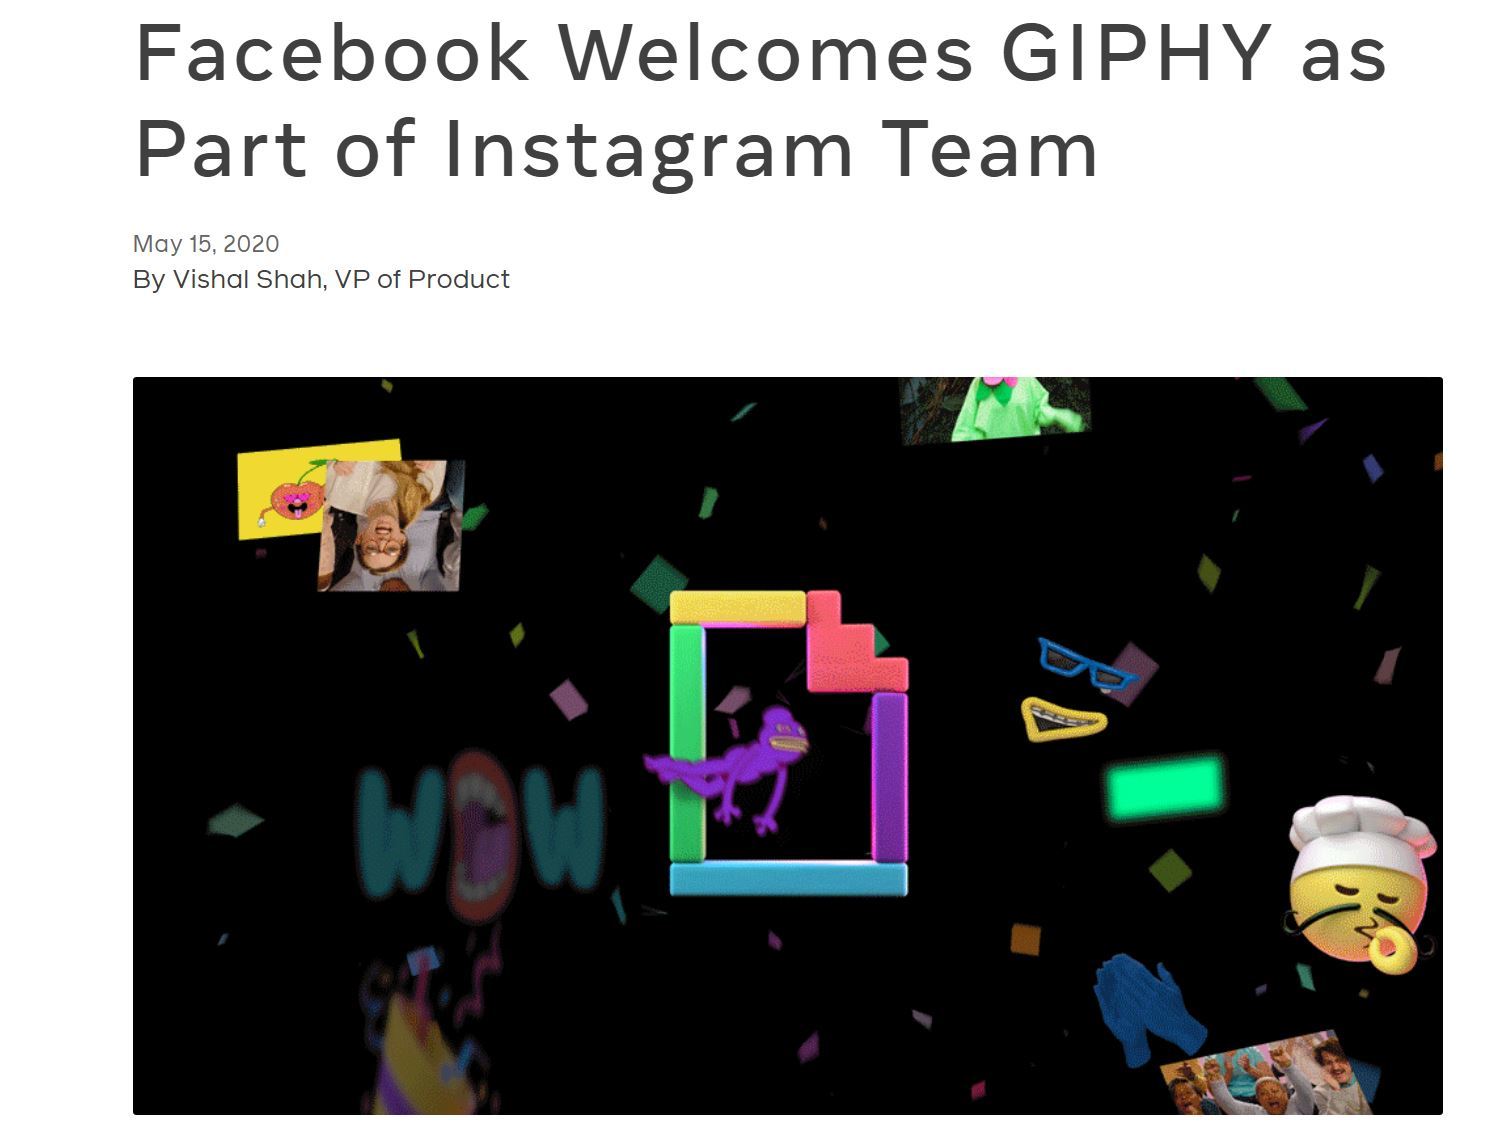 Facebook、GIFアニメの「GIPHY」を買収　Instagramに統合の計画